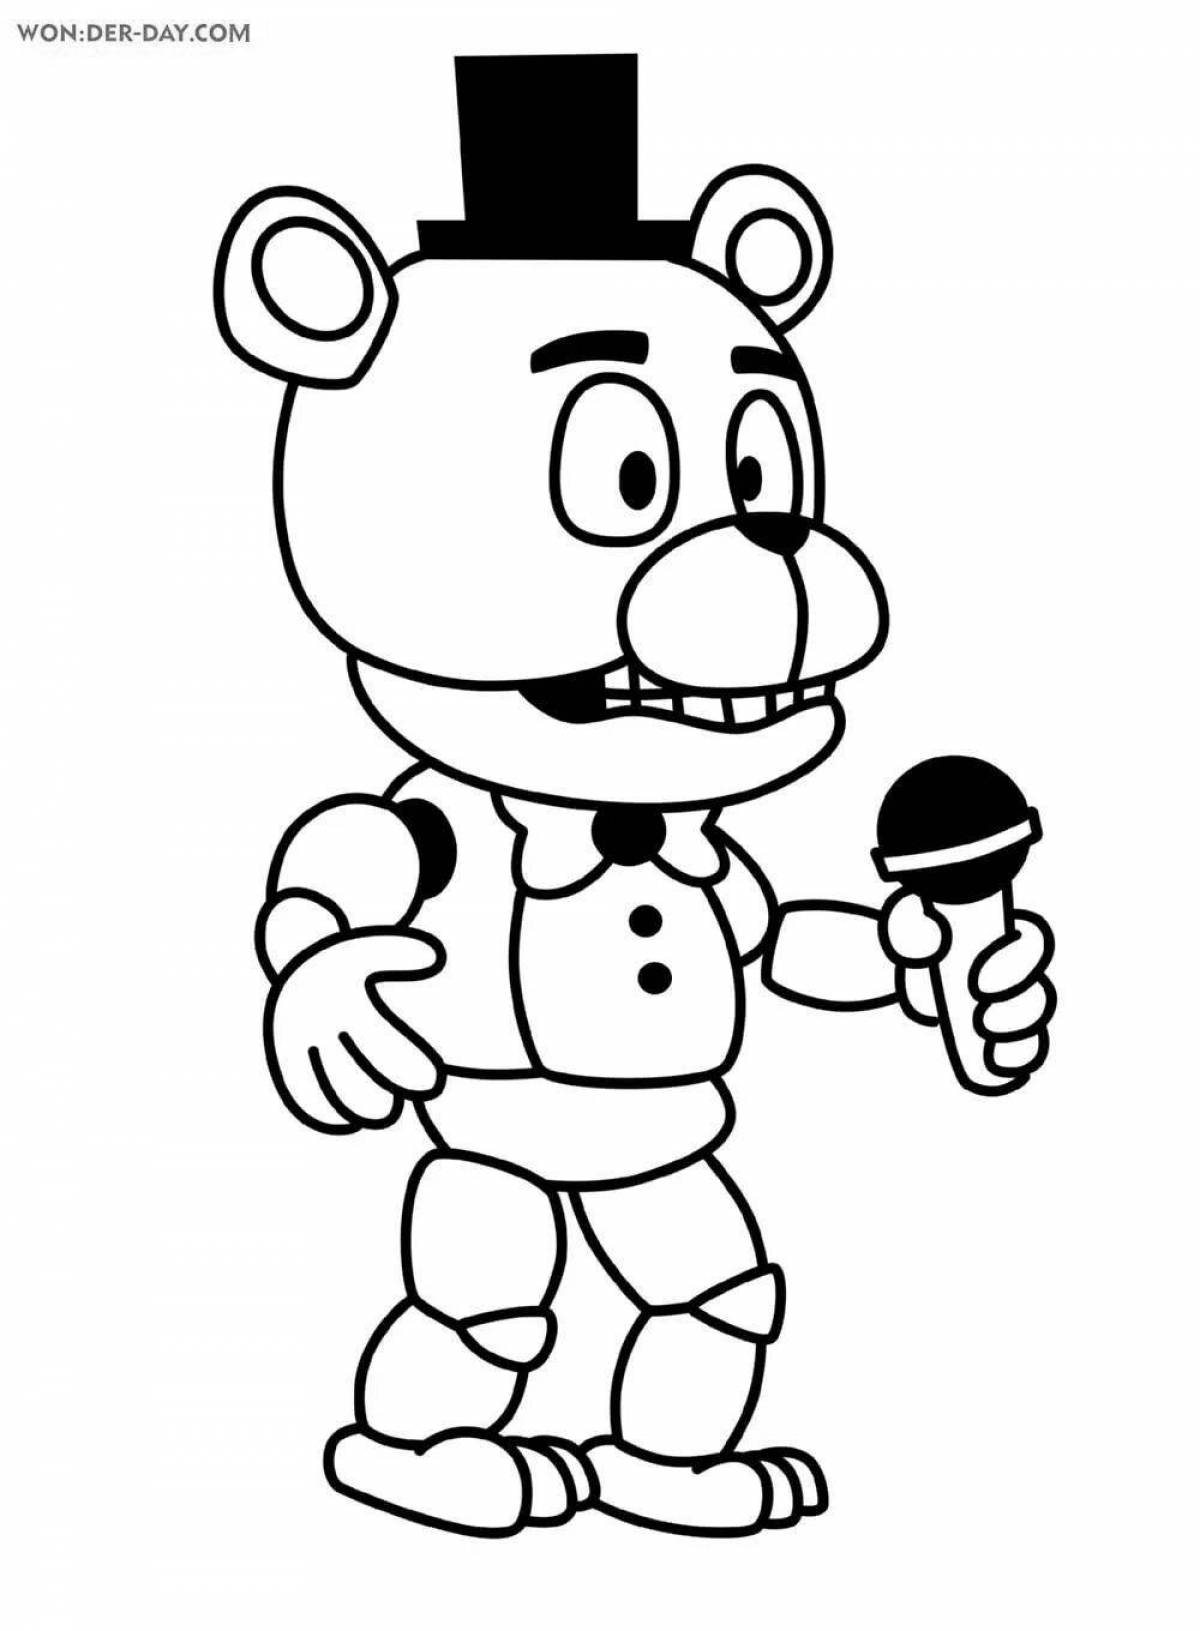 Amazing freddy coloring book